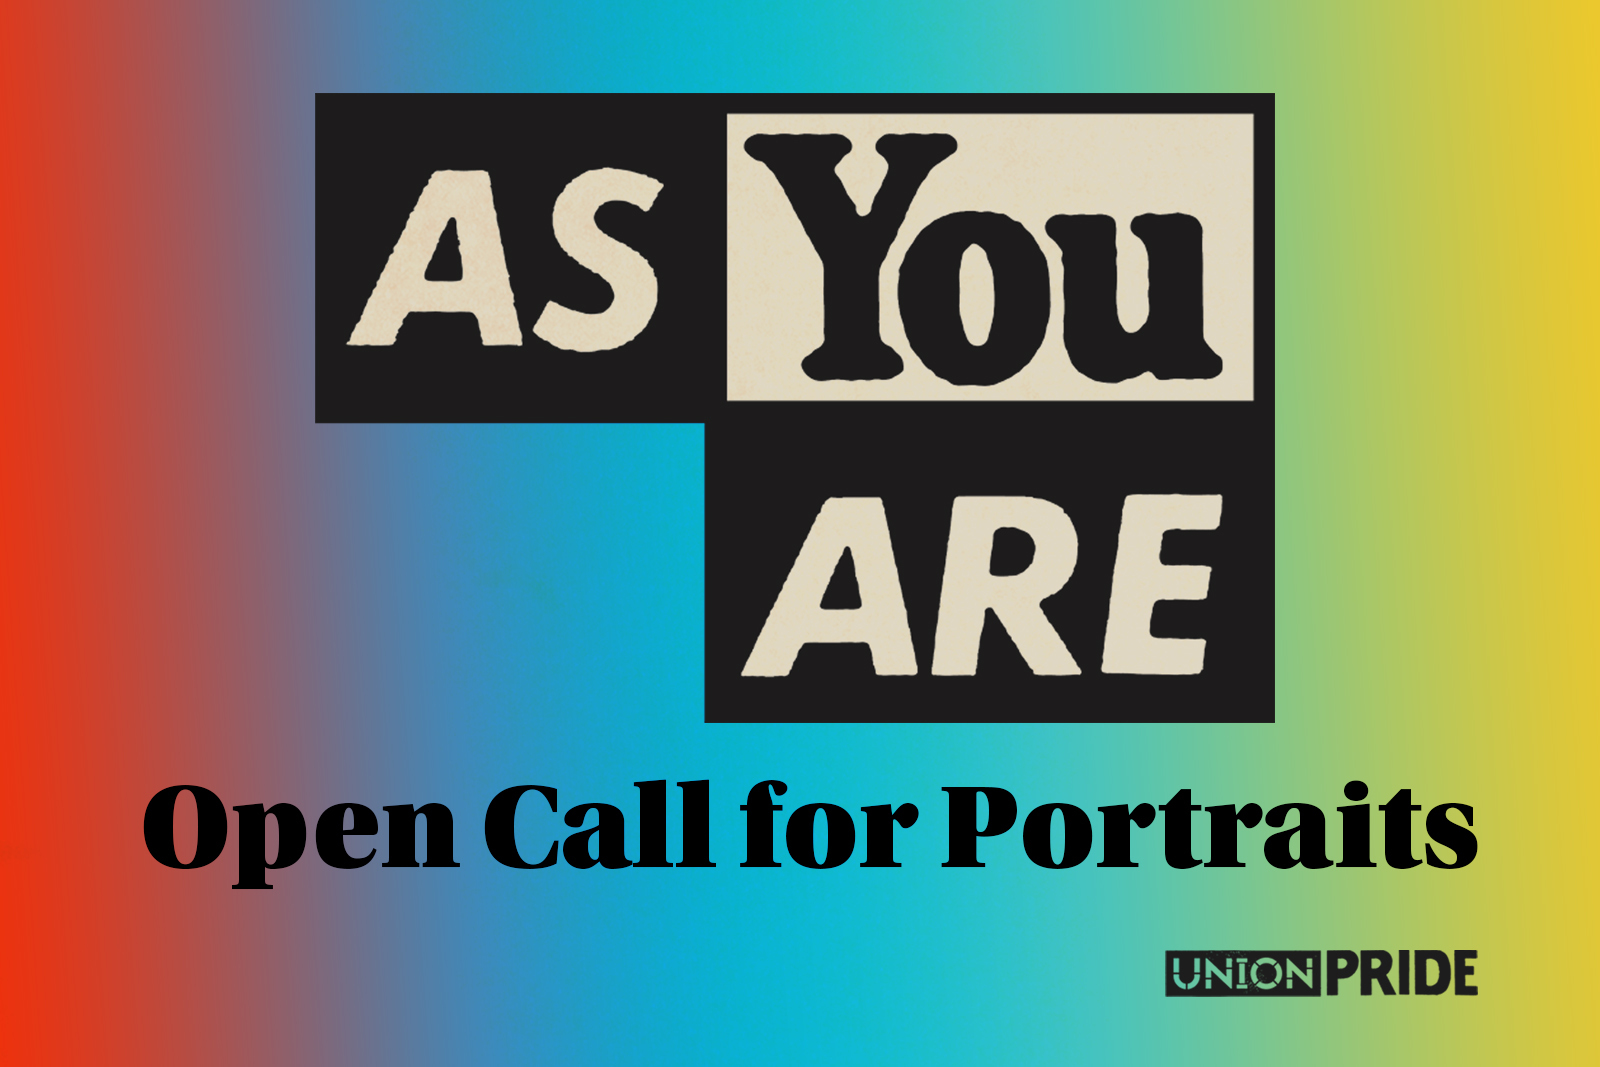 As You Are Open Call for Portraits text against a rainbow background